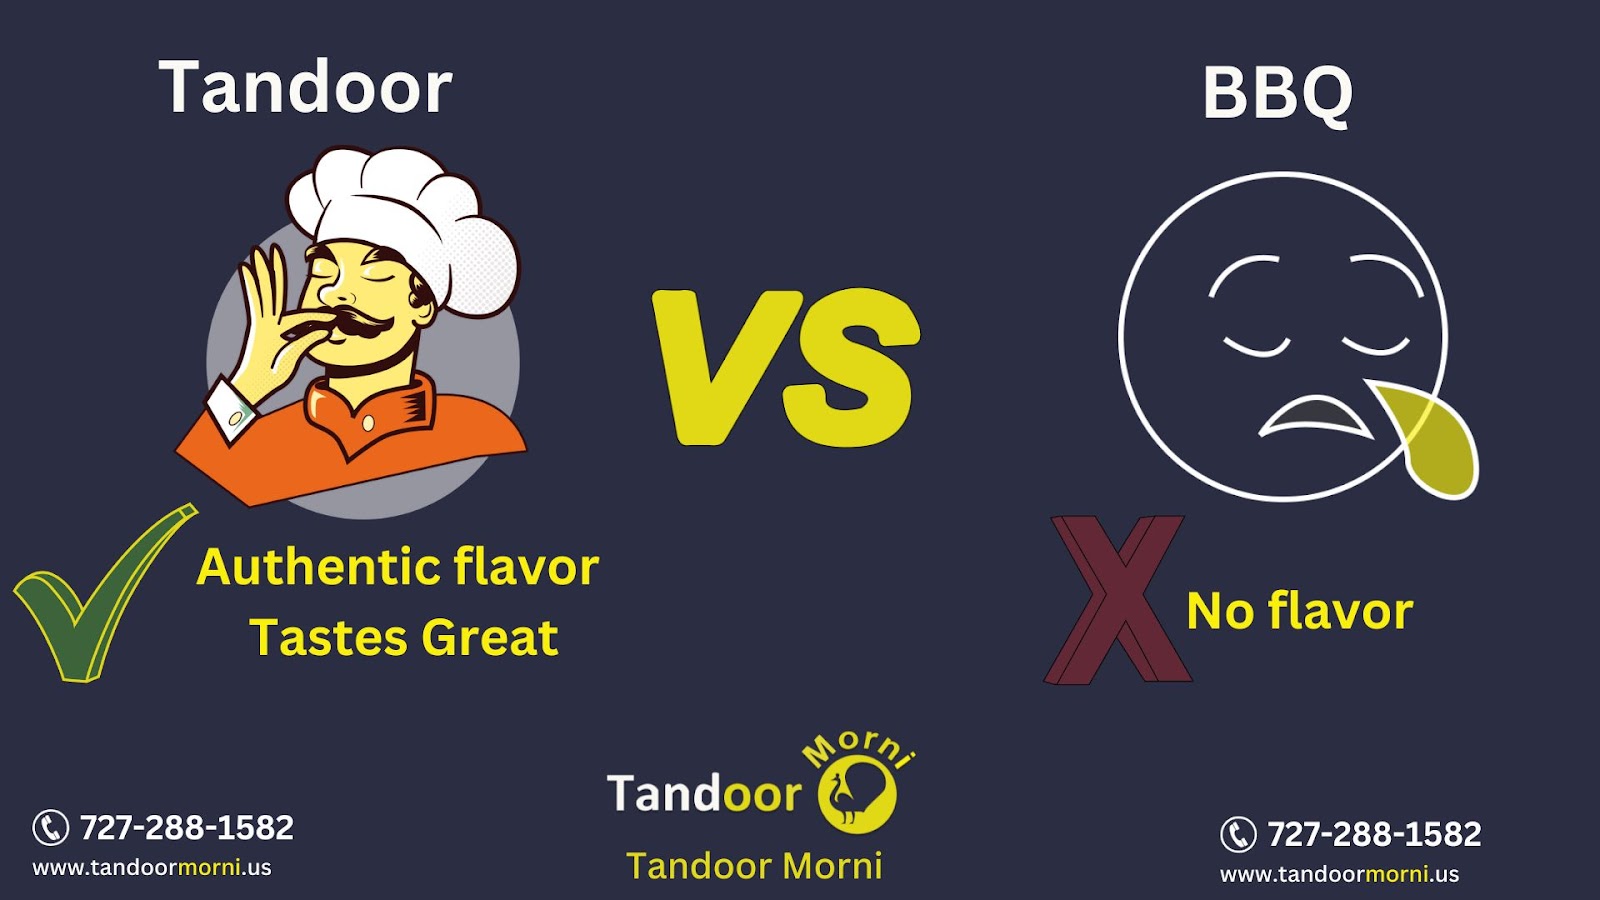 Tandoor has a more authentic flavor than barbecue.